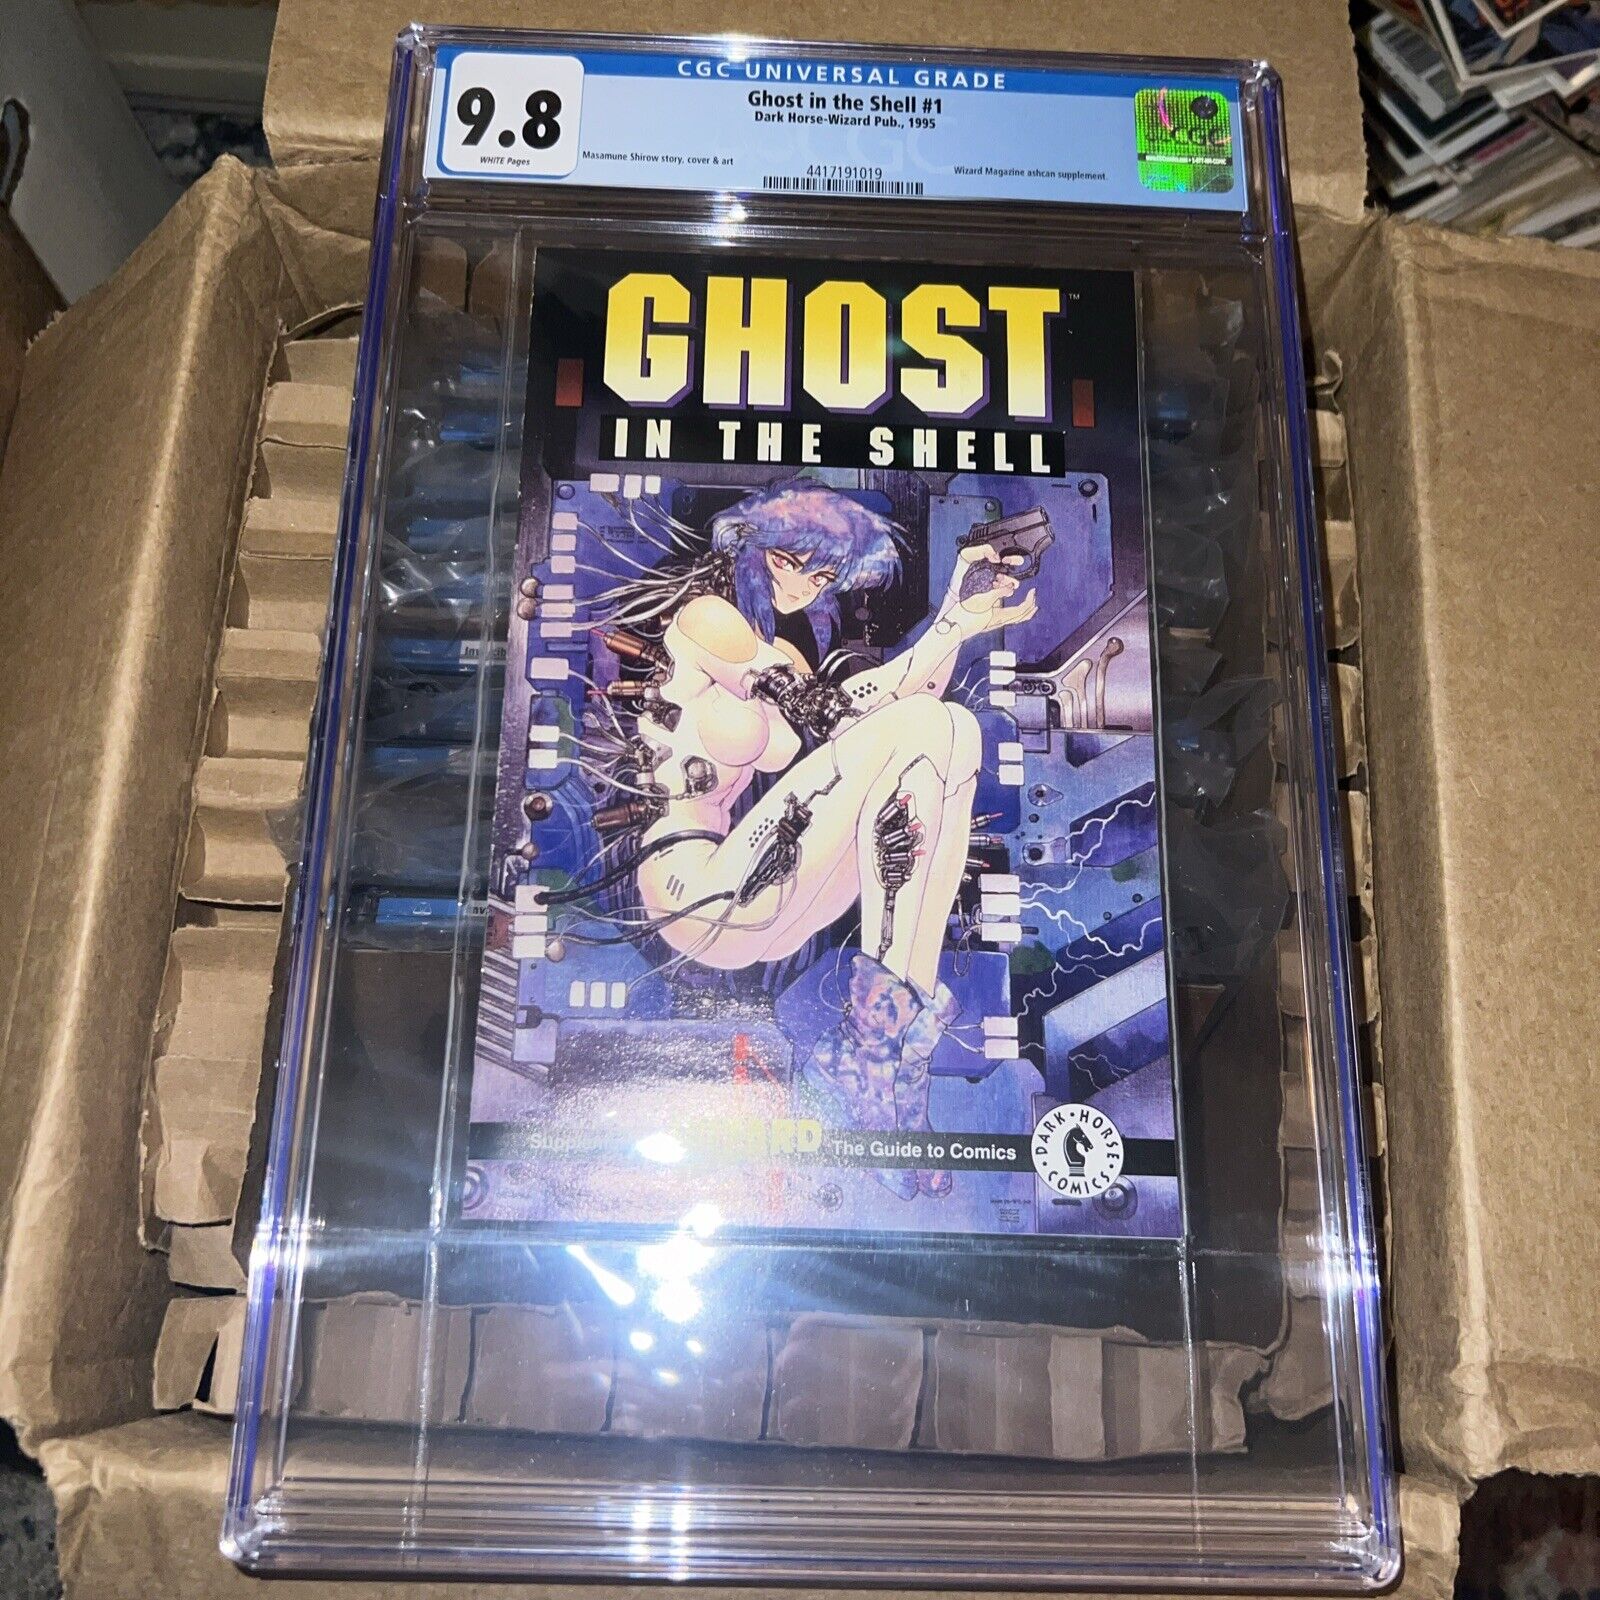 GHOST IN THE SHELL #1 CGC 9.8 Wizard Magazine ashcan supplement Masamune Shirow